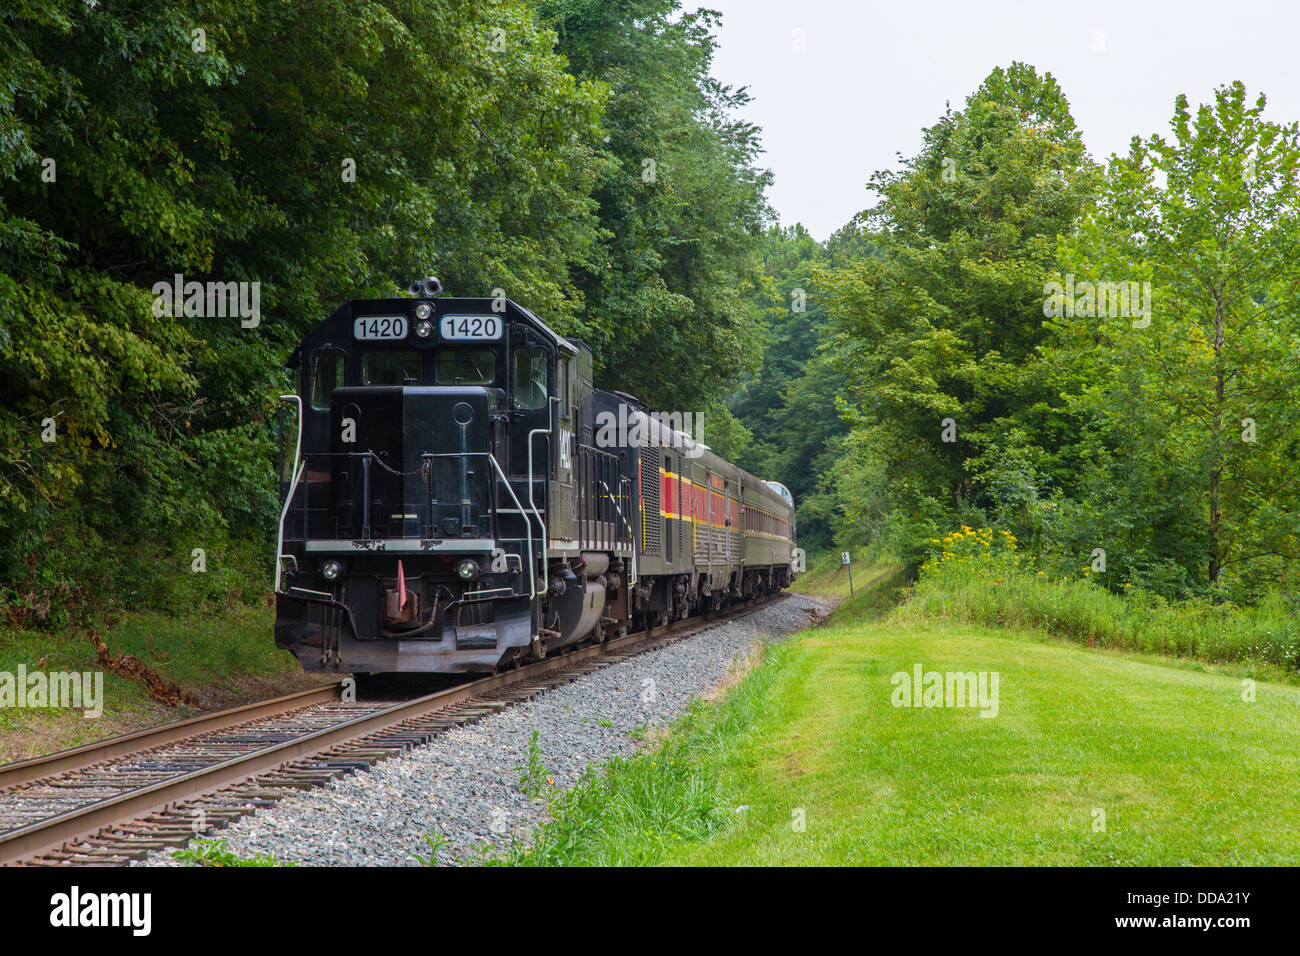 Train engine and passenger cars of Cuyahoga Valley Scenic Railroad though Cuyahoga Valley National Park in Ohio United States Stock Photo